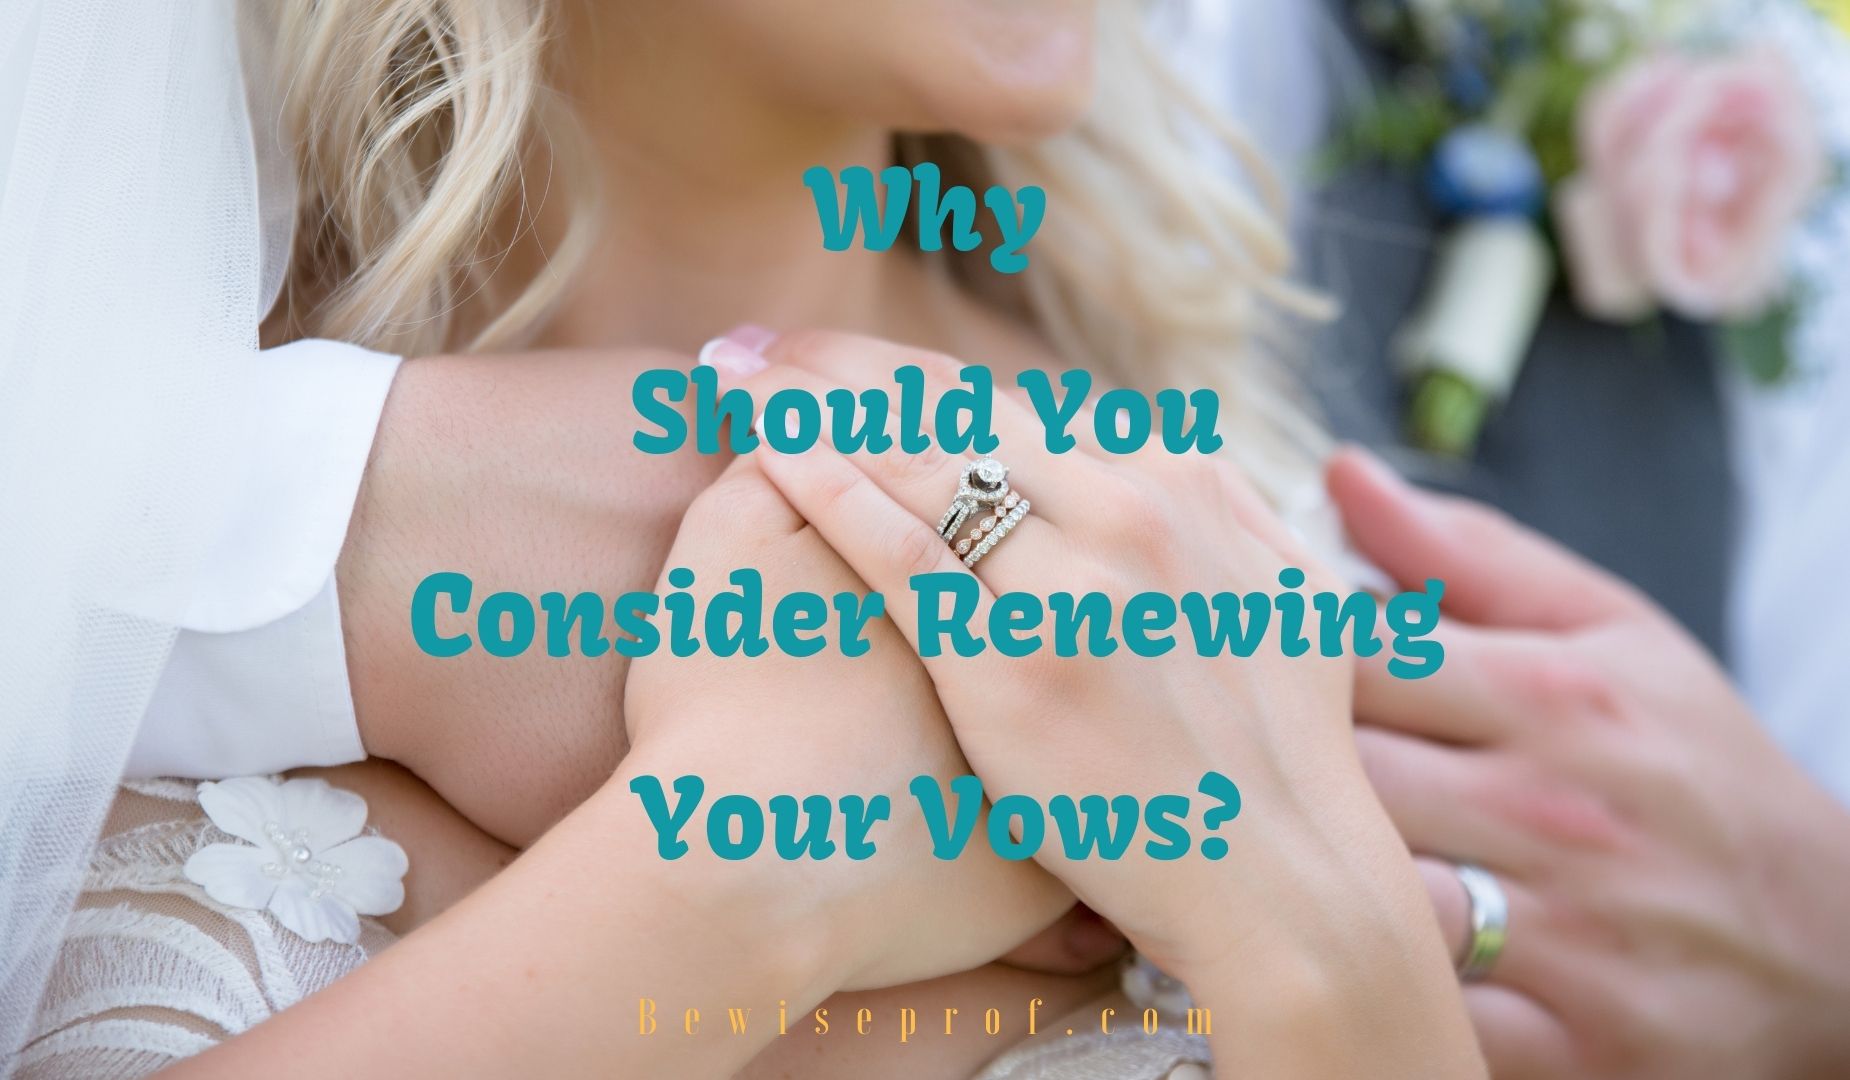 Why Should You Consider Renewing Your Vows?